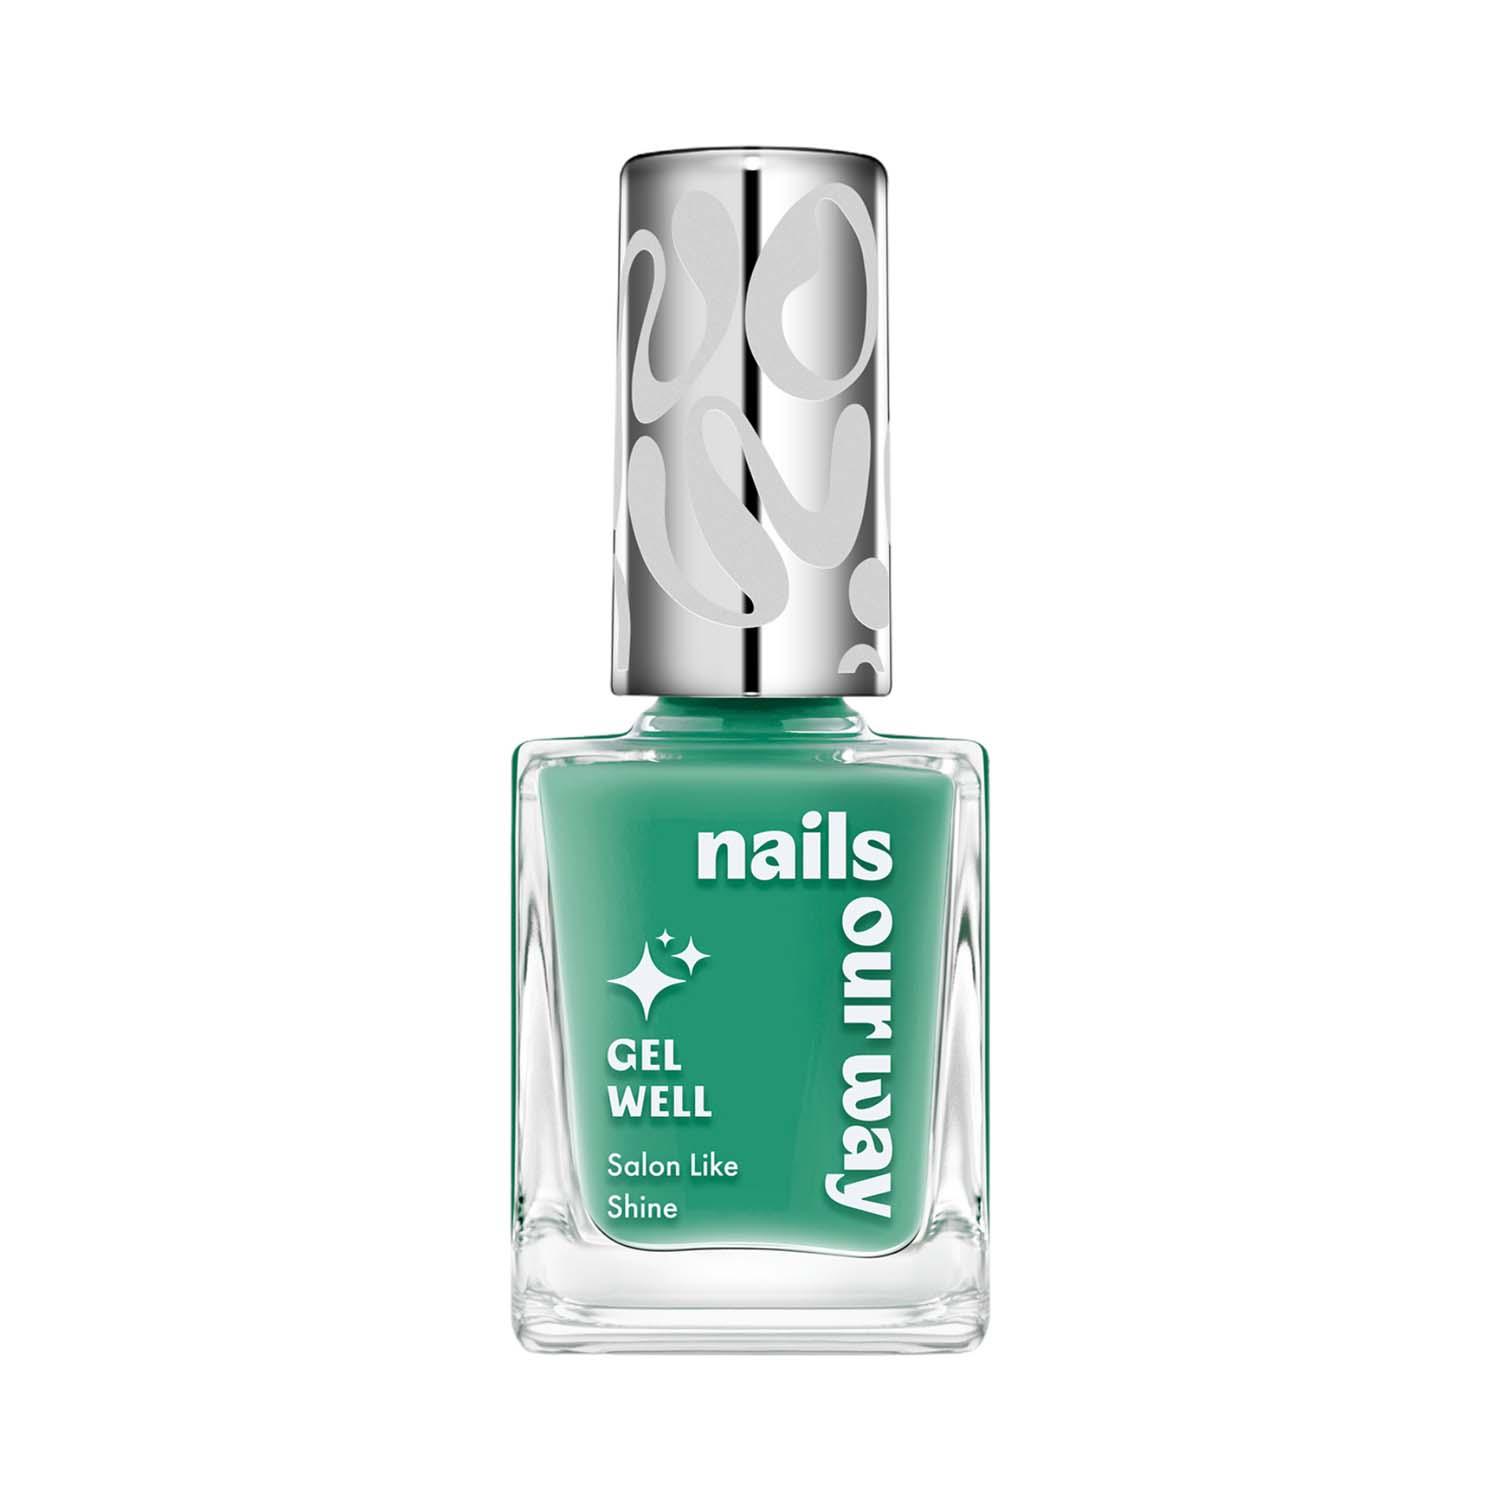 Nails Our Way | Nails Our Way Gel Well Nail Enamel - 405 Eclectic (10 ml)